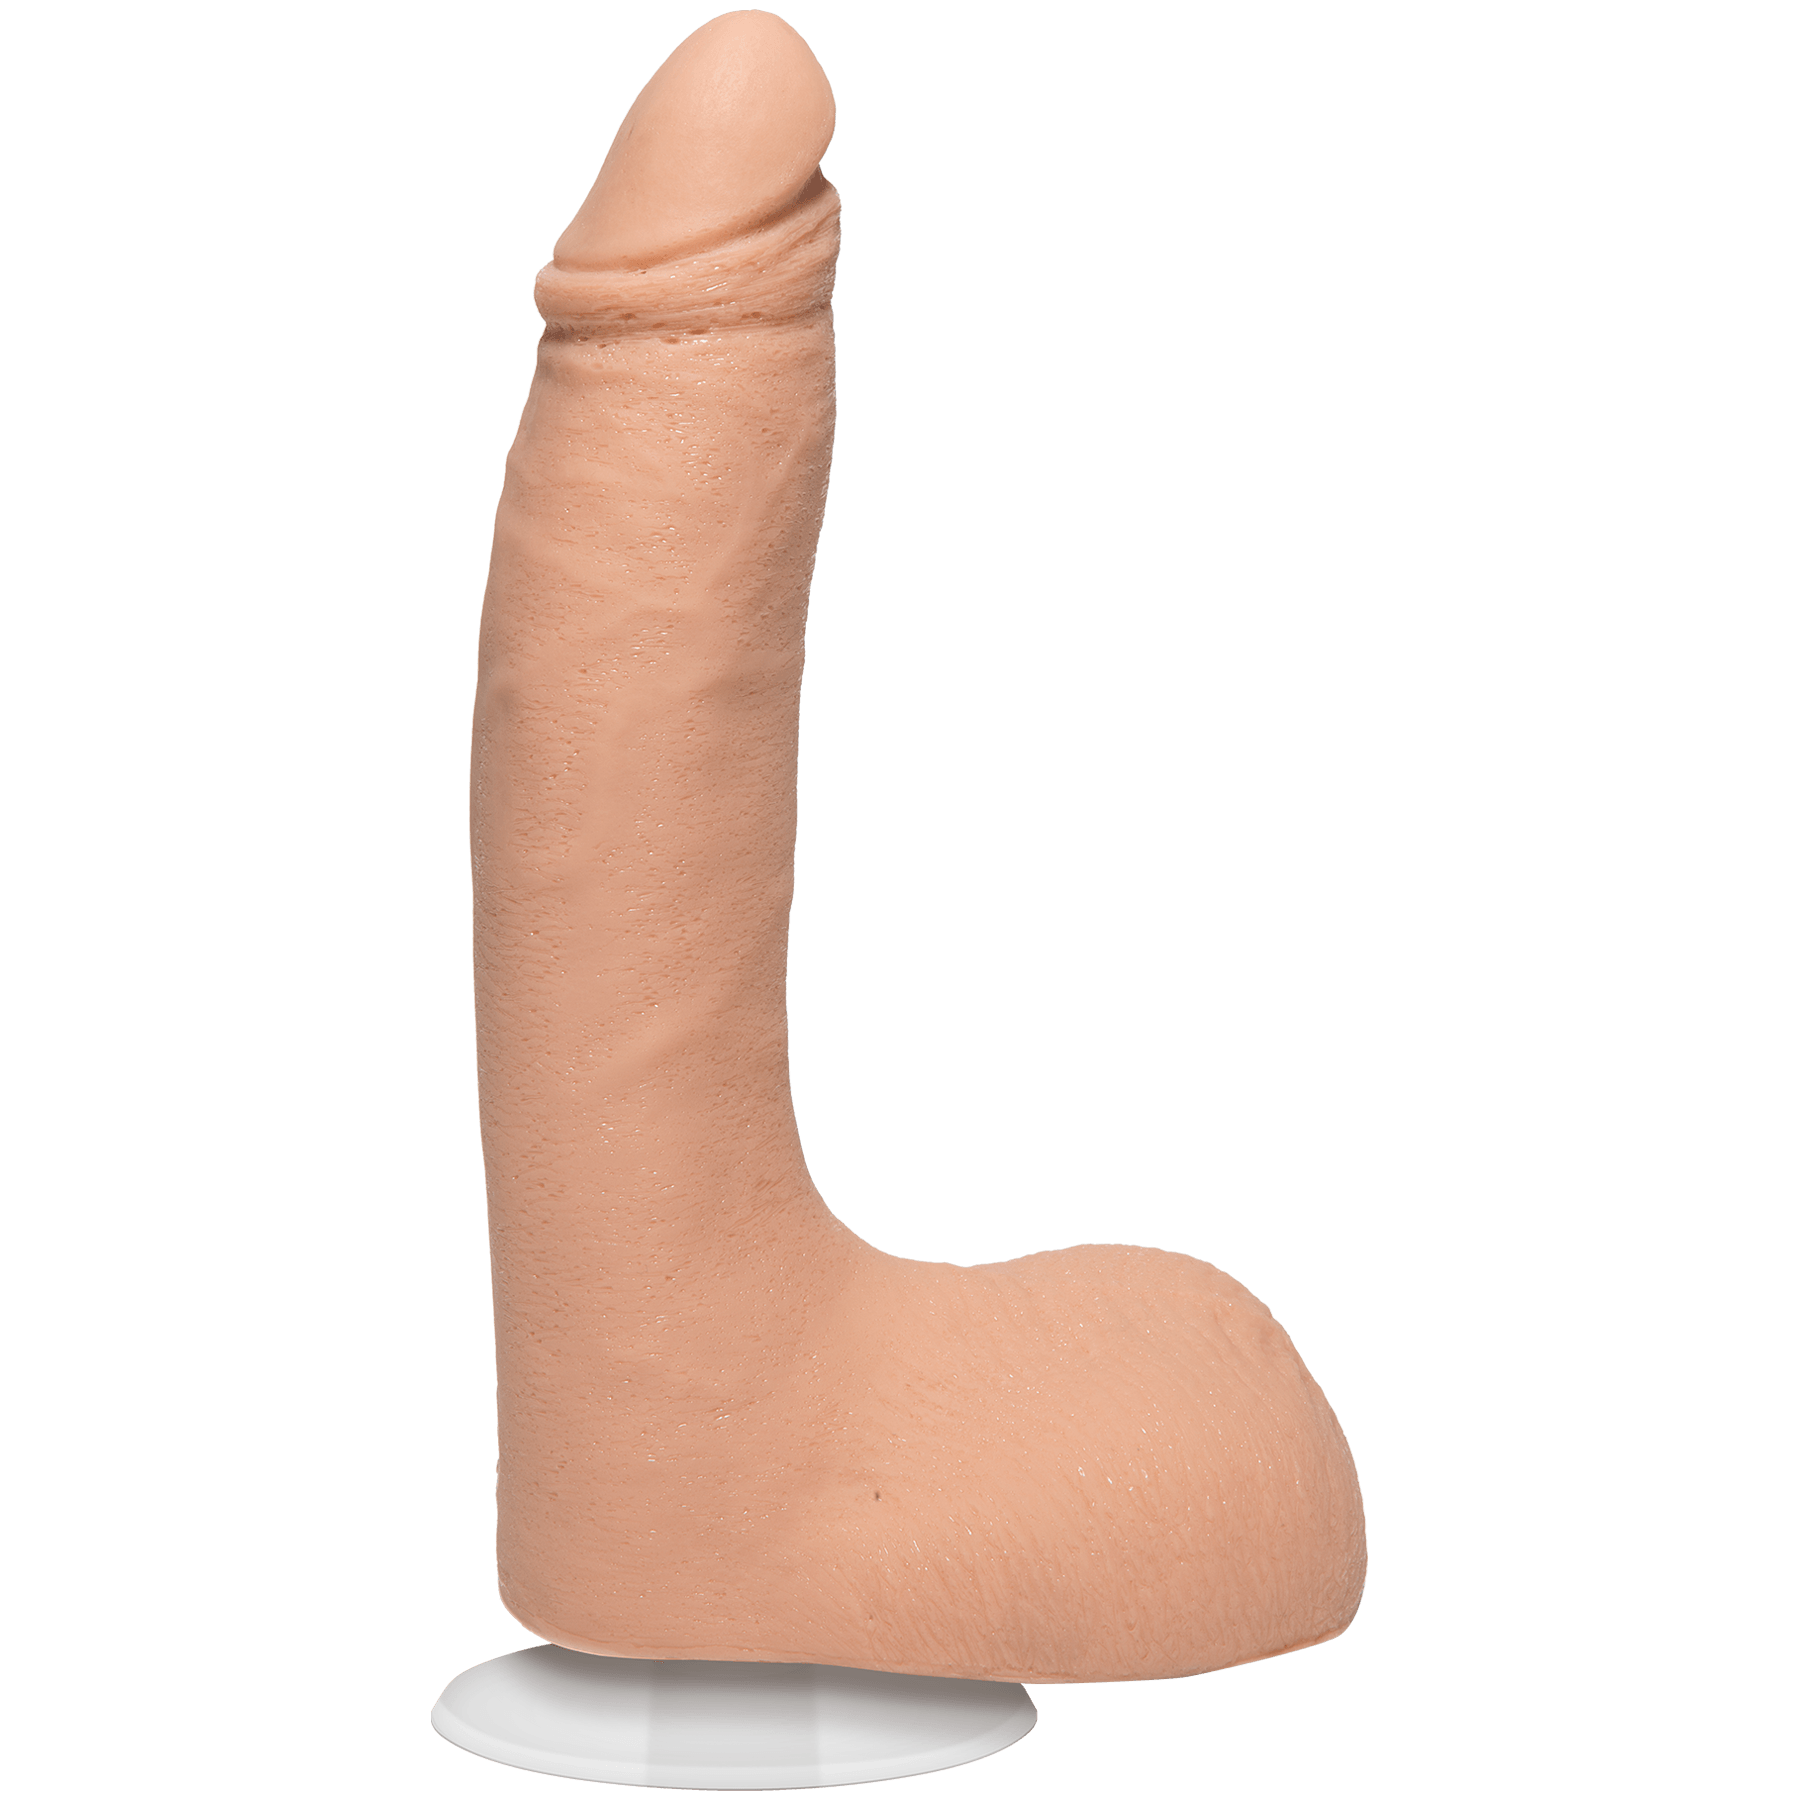 Doc Johnson Signature Cocks Randy Ultraskyn 8.5in Cock - Buy At Luxury Toy X - Free 3-Day Shipping